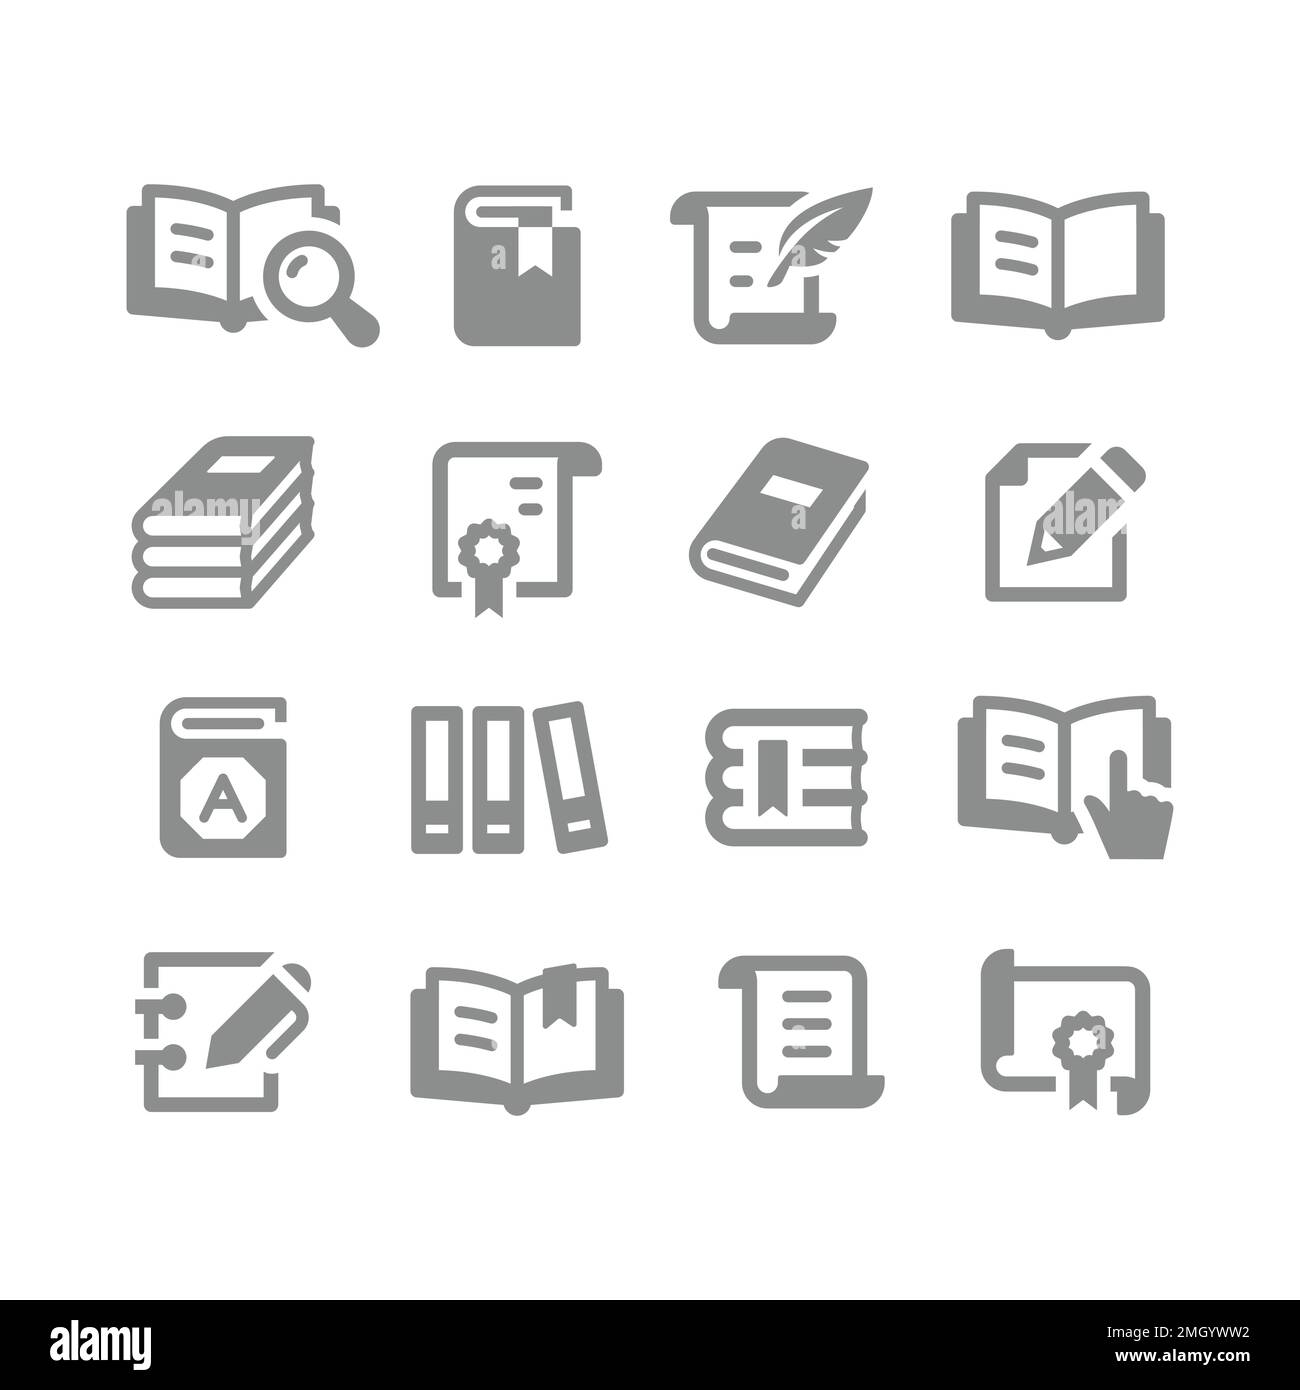 Book, open and textbook vector icon set. Pile of books, document and paper icons. Stock Vector